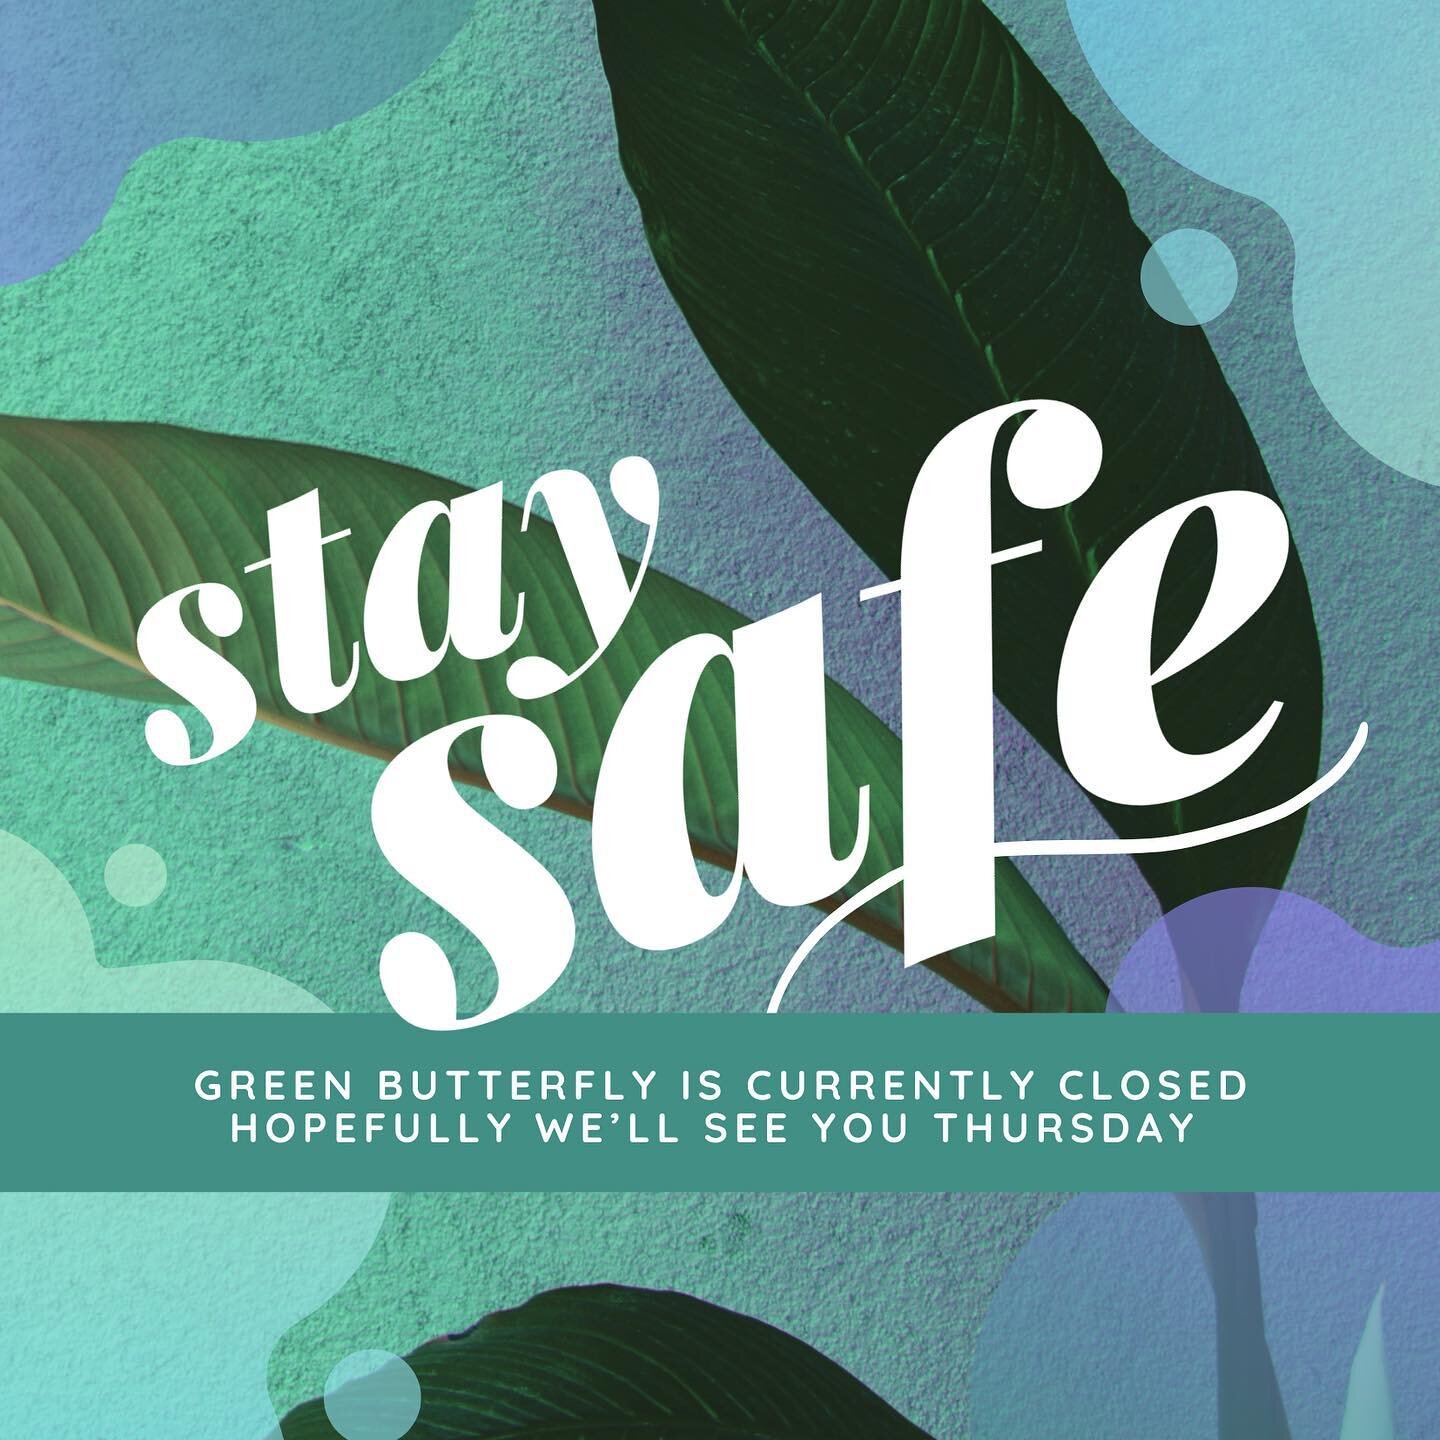 Oh no! Due to the current lockdown we have closed our doors again. 

We hope to reopen on Thursday the 18th of February and will keep you updated on our next steps. 

Stay safe, we&rsquo;ll see you soon. 

Lots of love,
The Butterflies 🦋
.
.
.
.
.
.